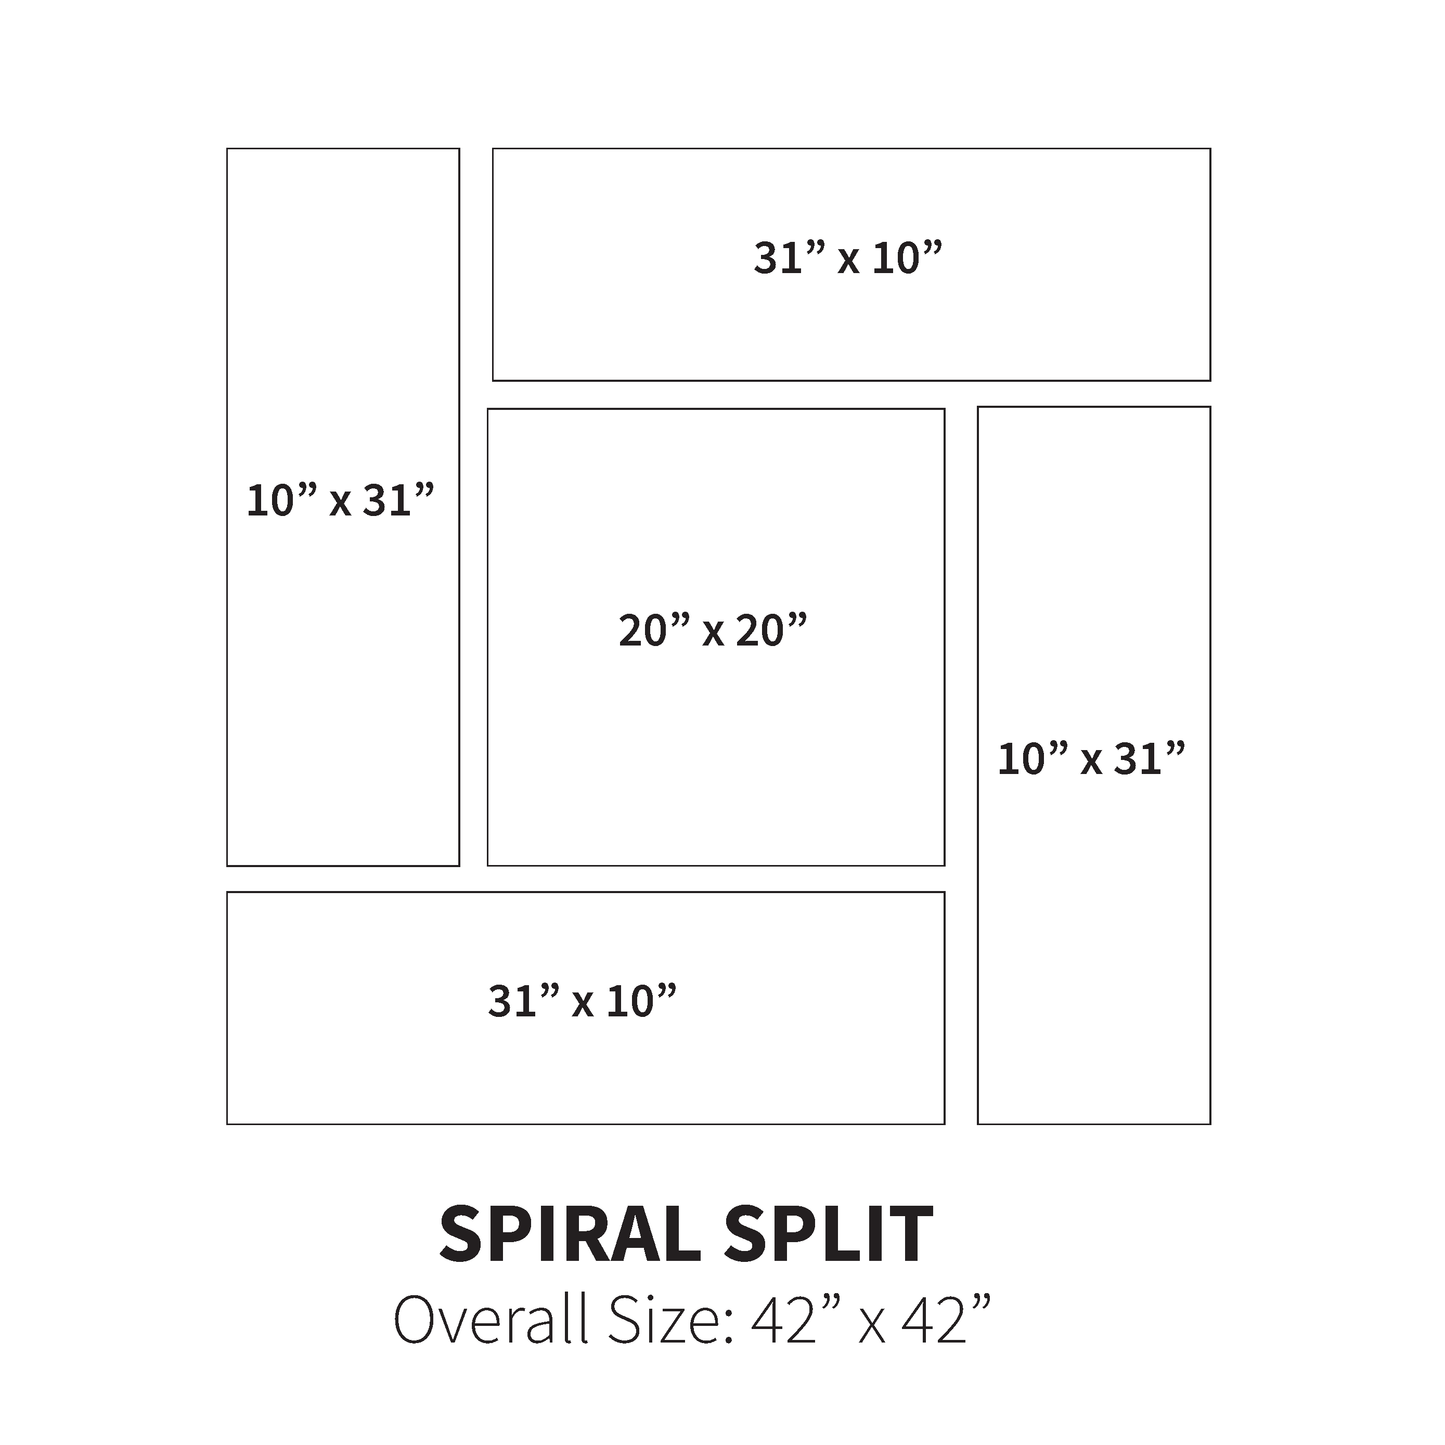 Spiral Split (Overall Size: 42" x 42")